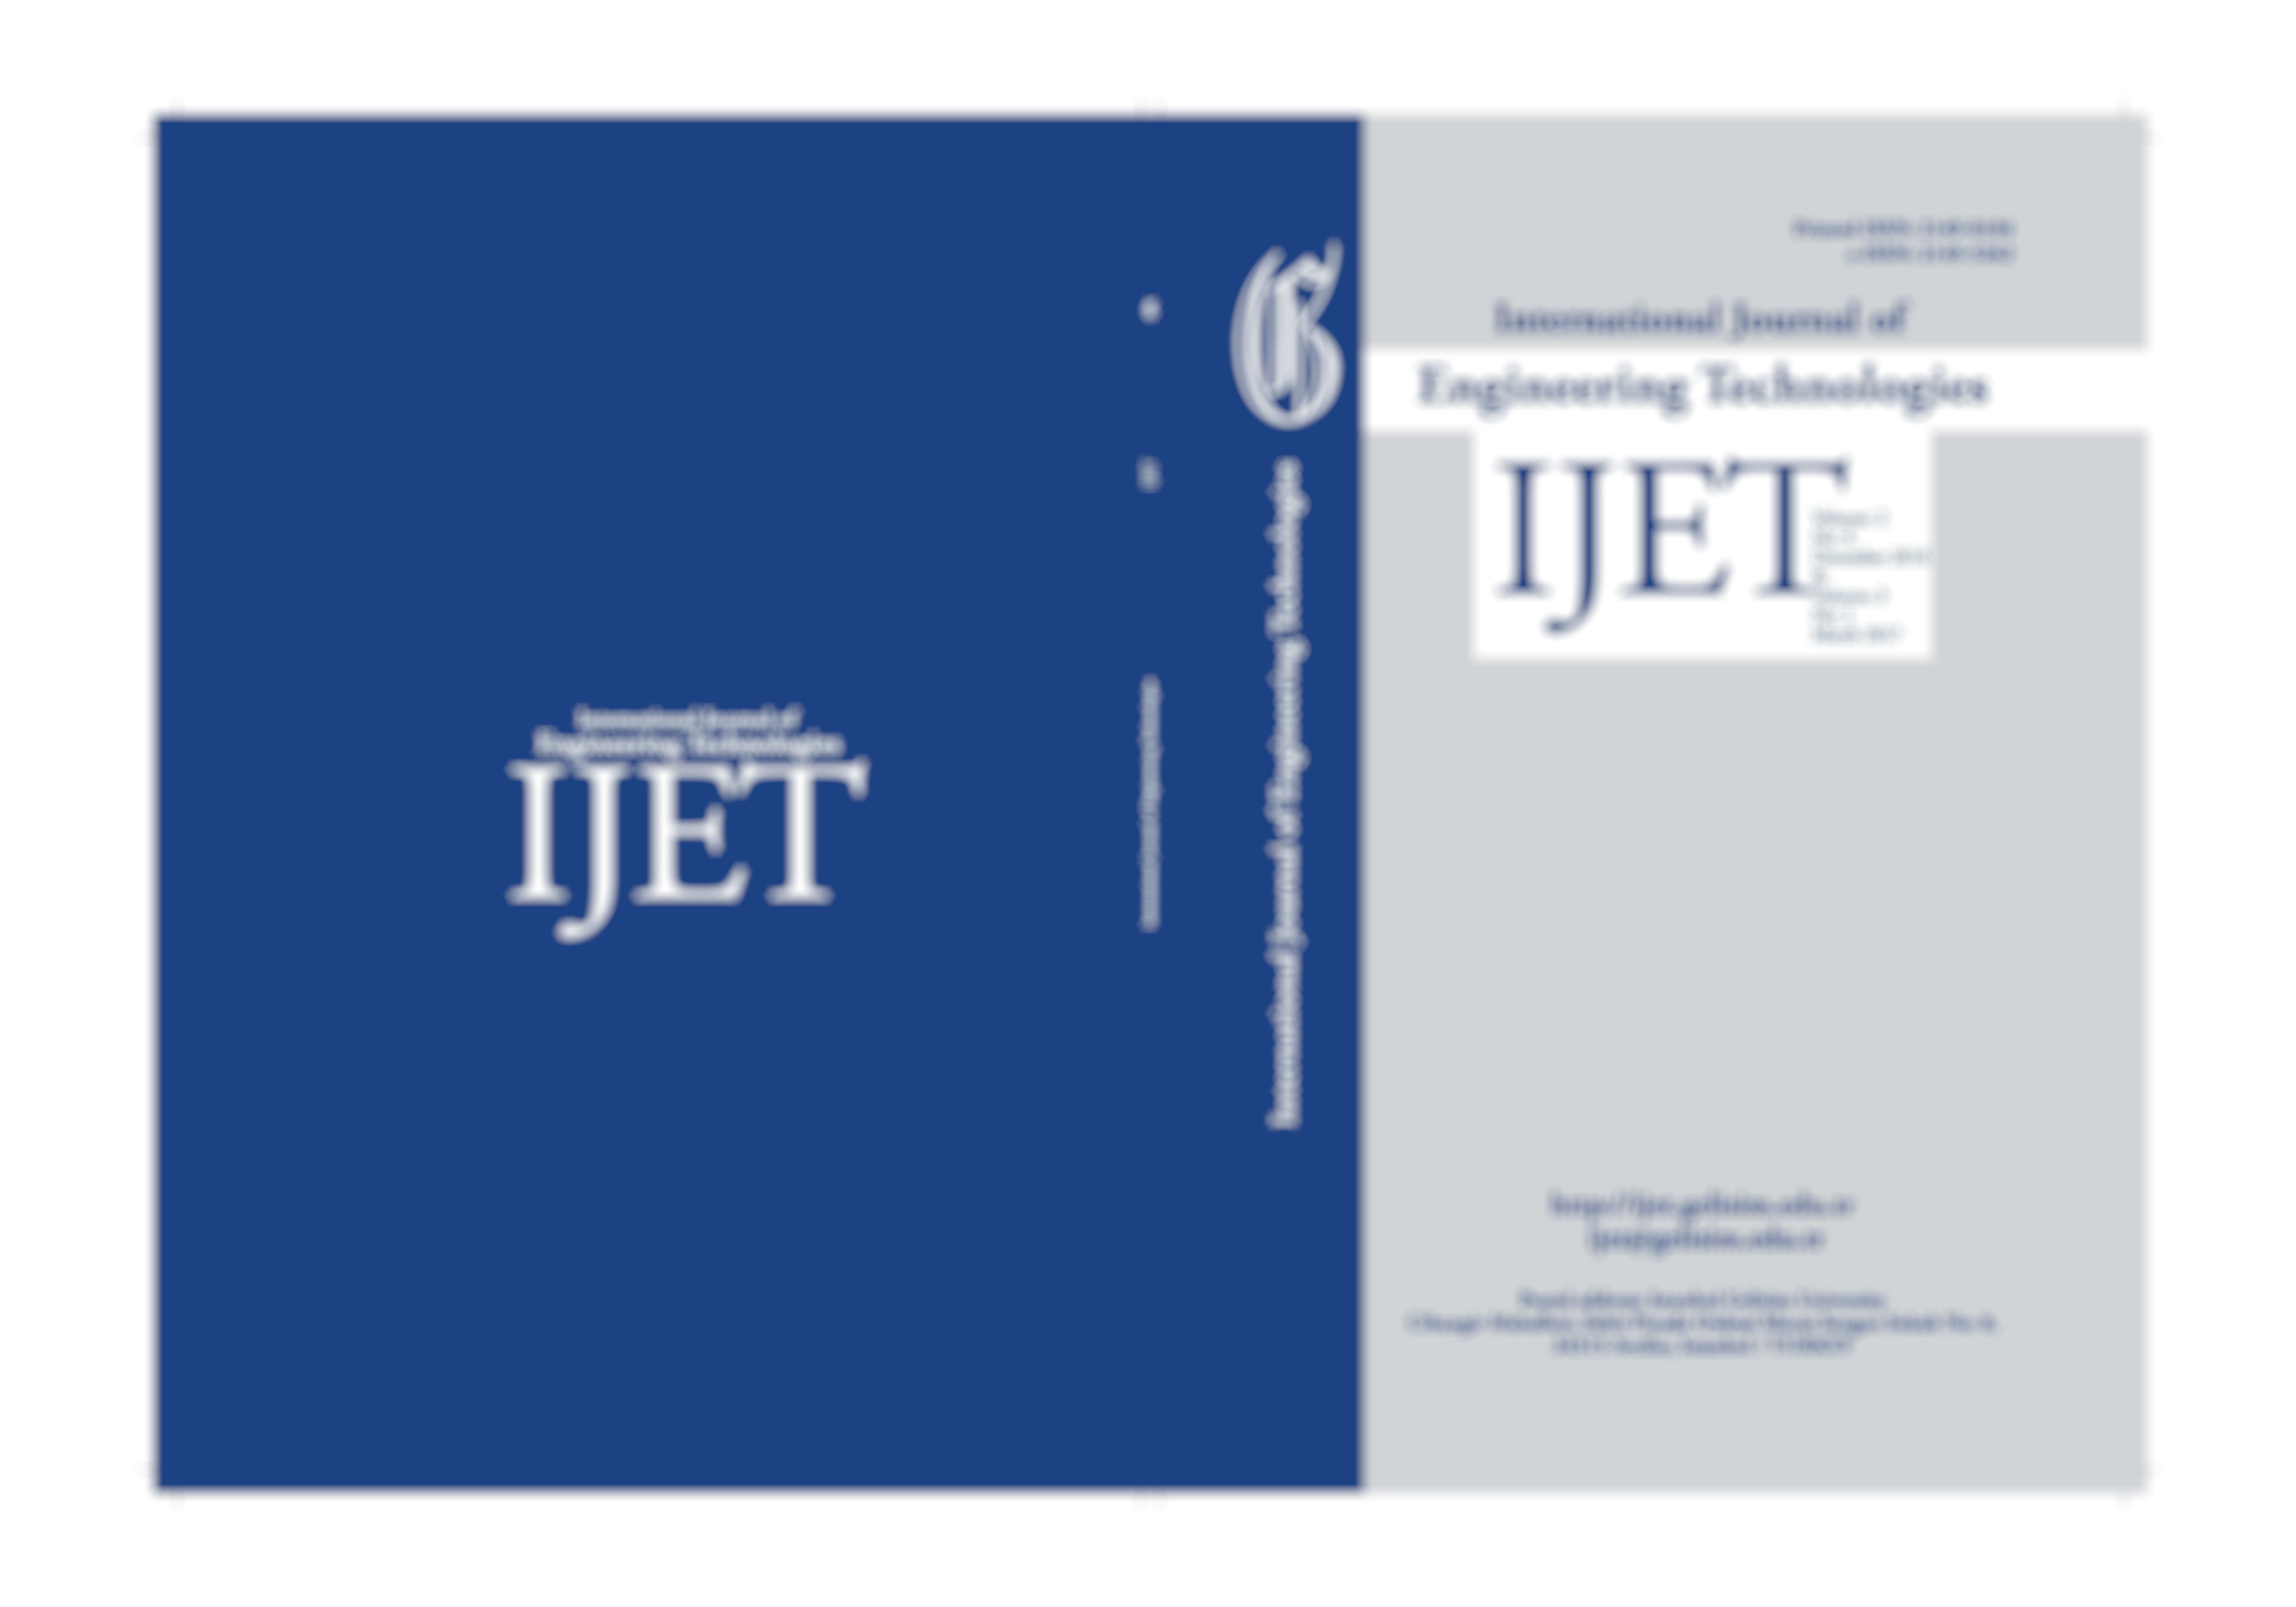 International Journal of Engineering Technologies (IJET) New Issues Have Been Published!